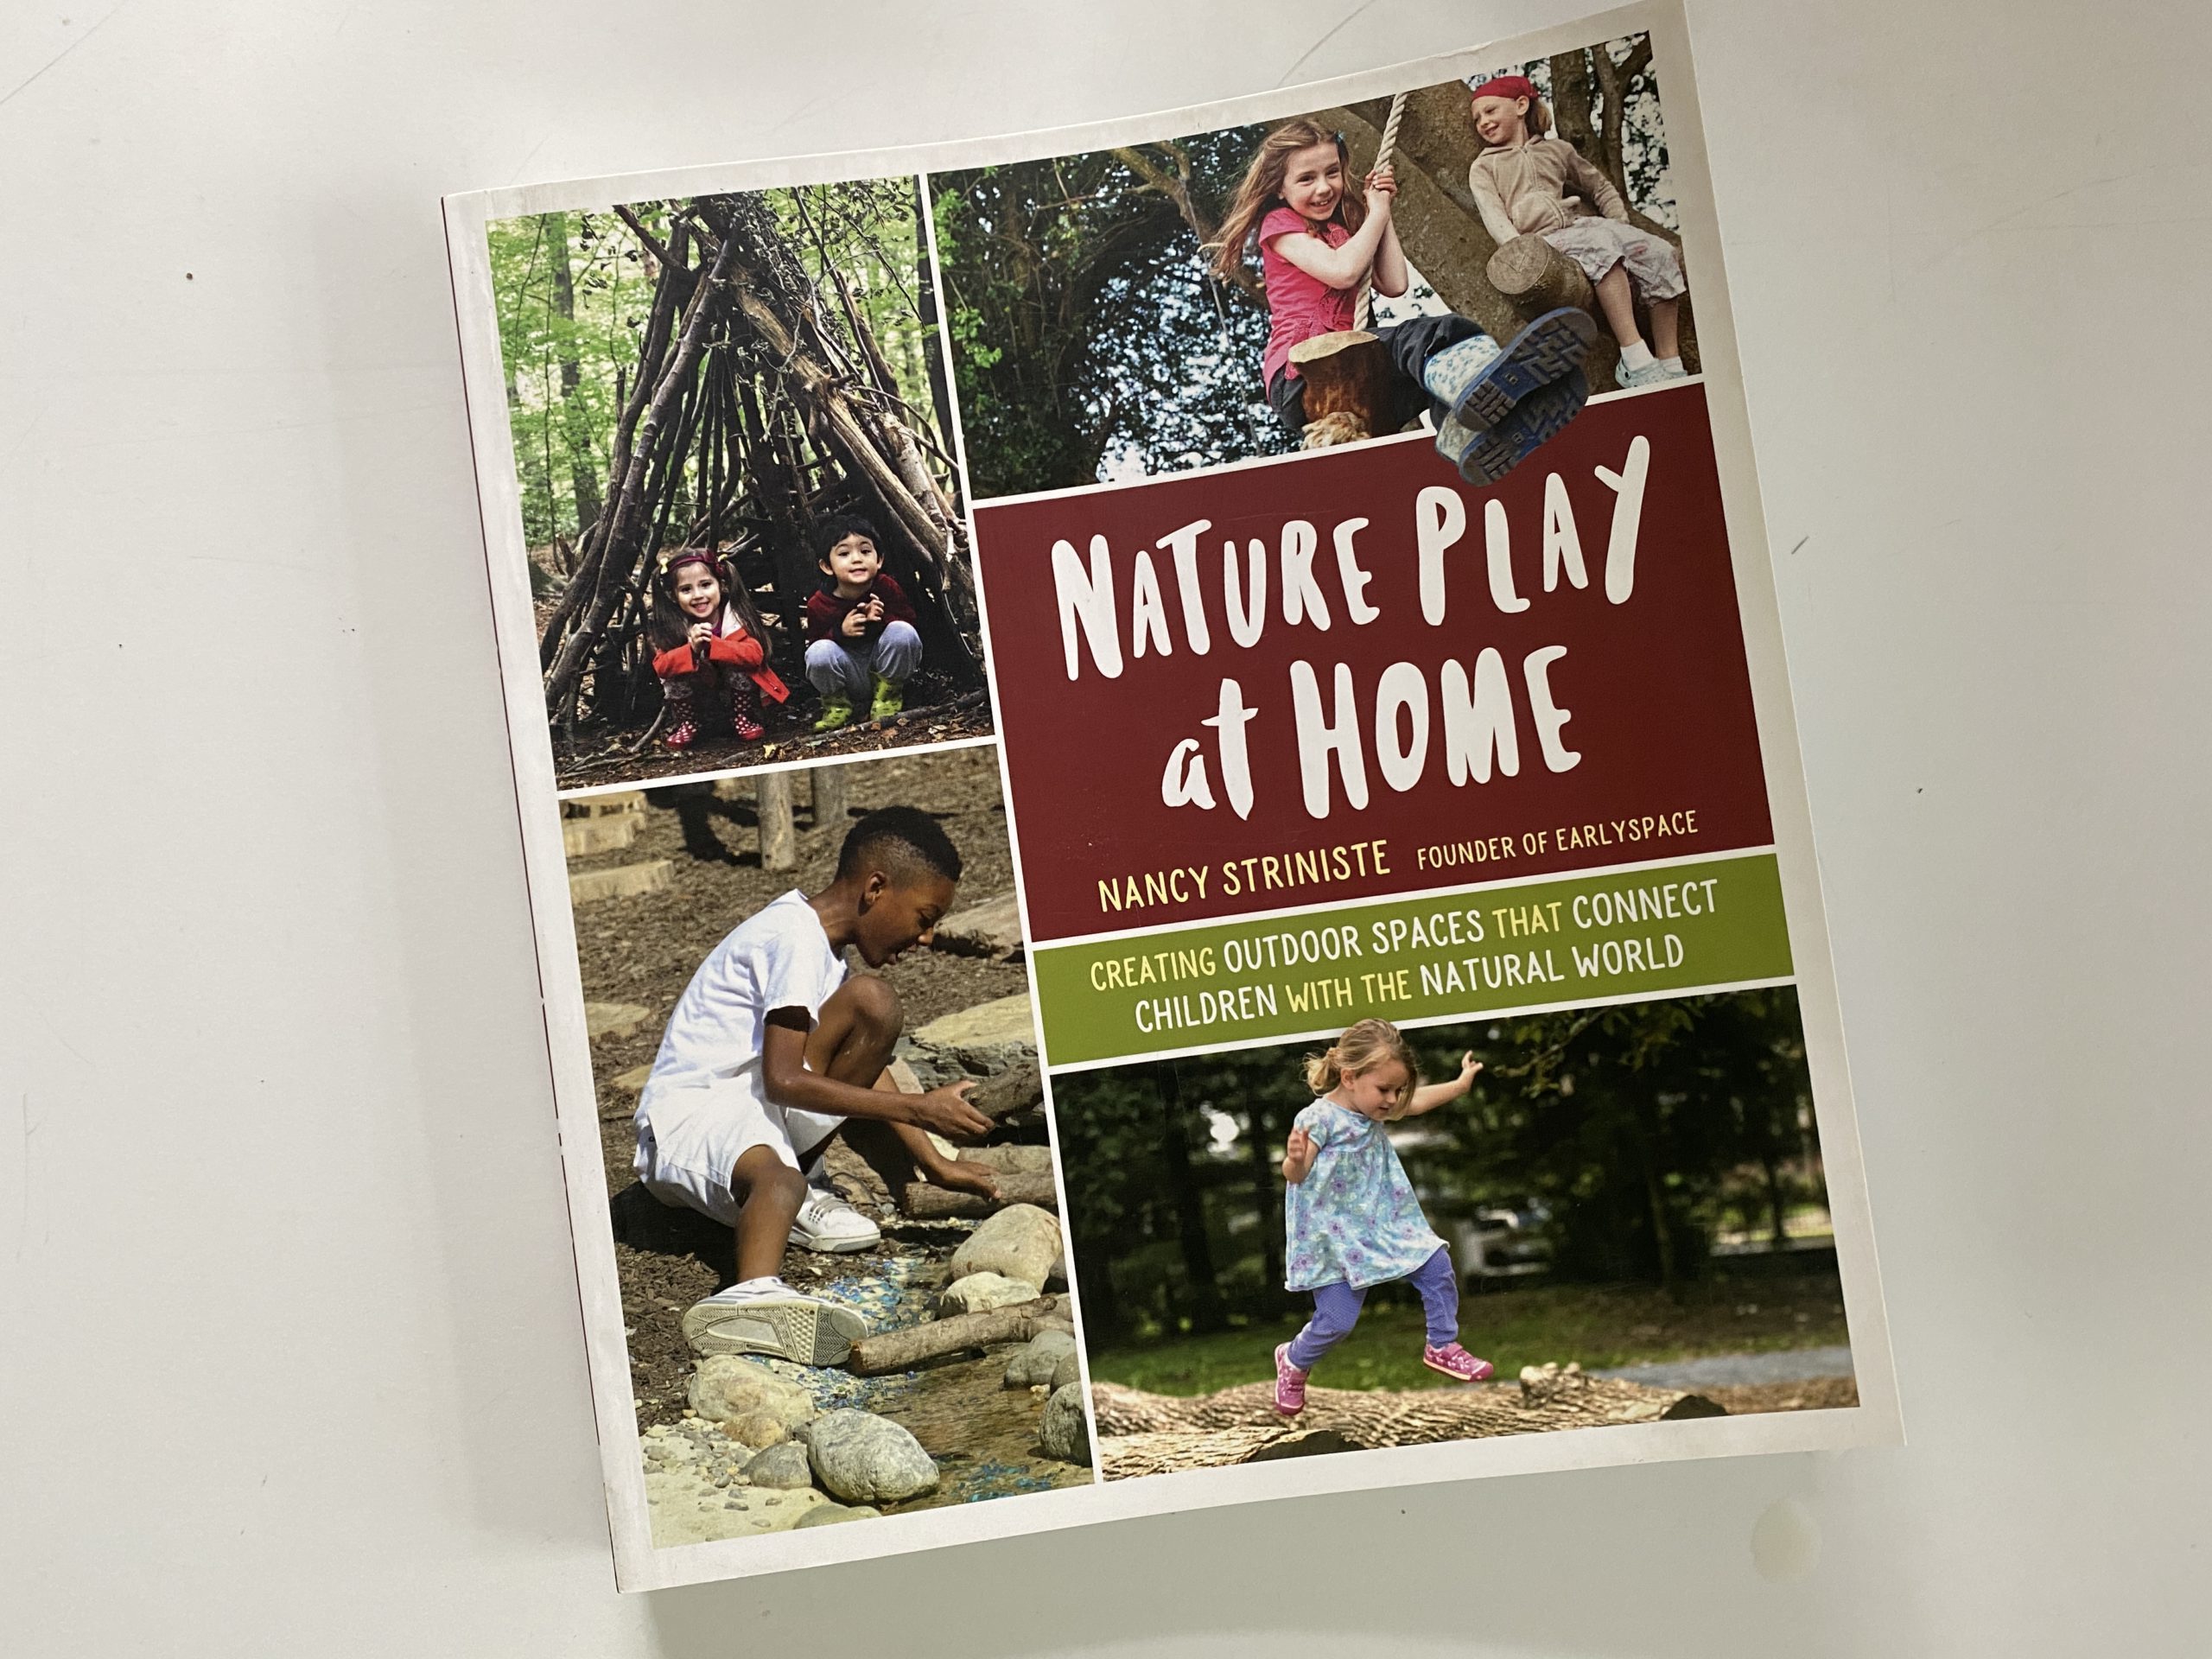 Nature Play at Home by Nancy Striniste, Founder of Earlyspace. Creating outdoor spaces that connect children with the natural world